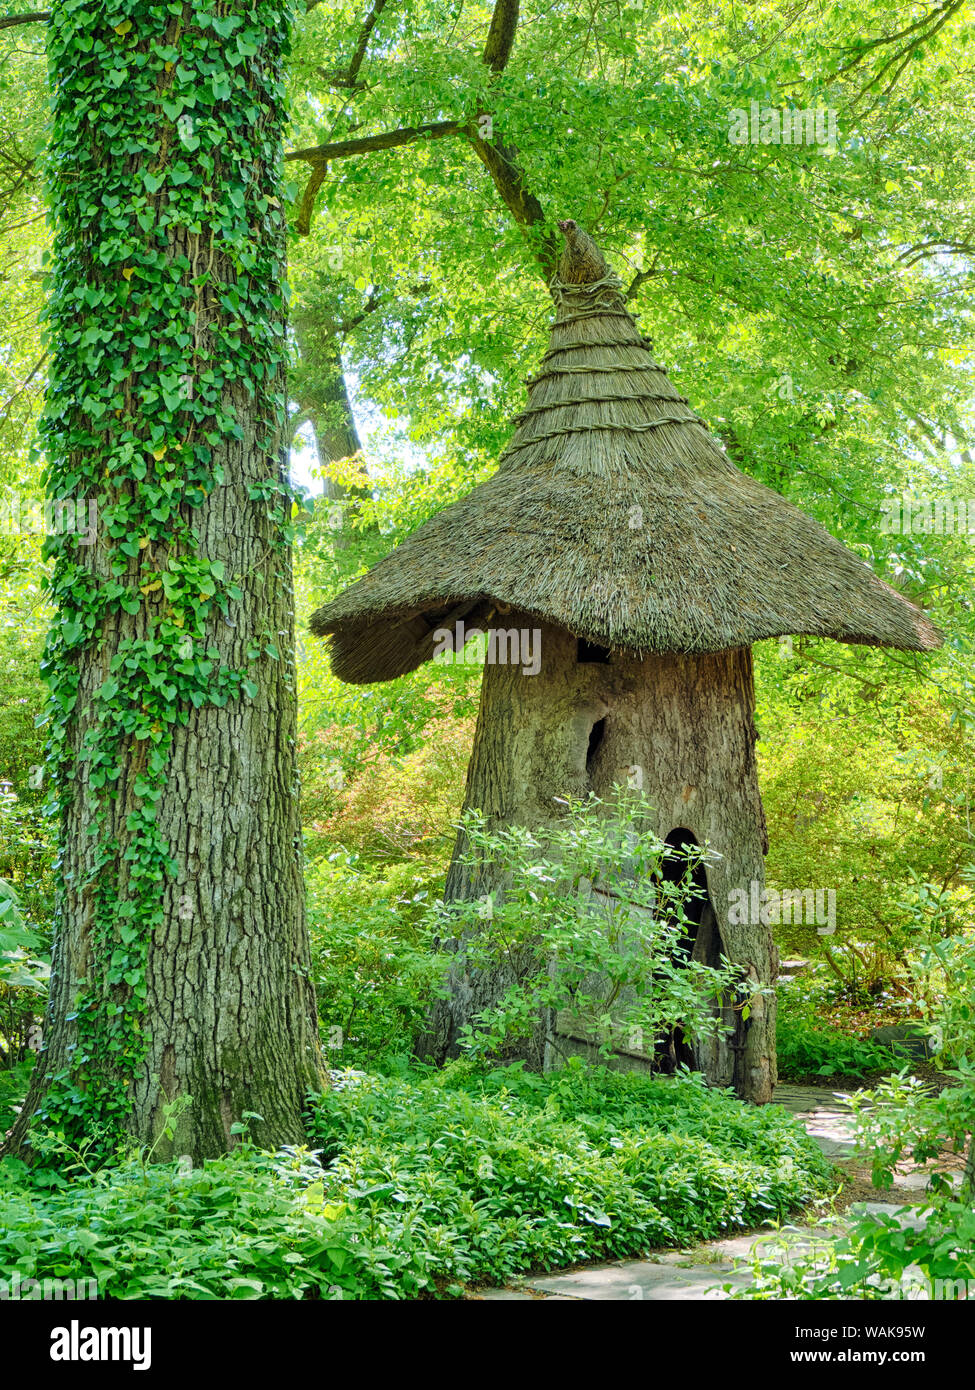 USA, Delaware. Witch's Hat House on garden grounds. Stock Photo